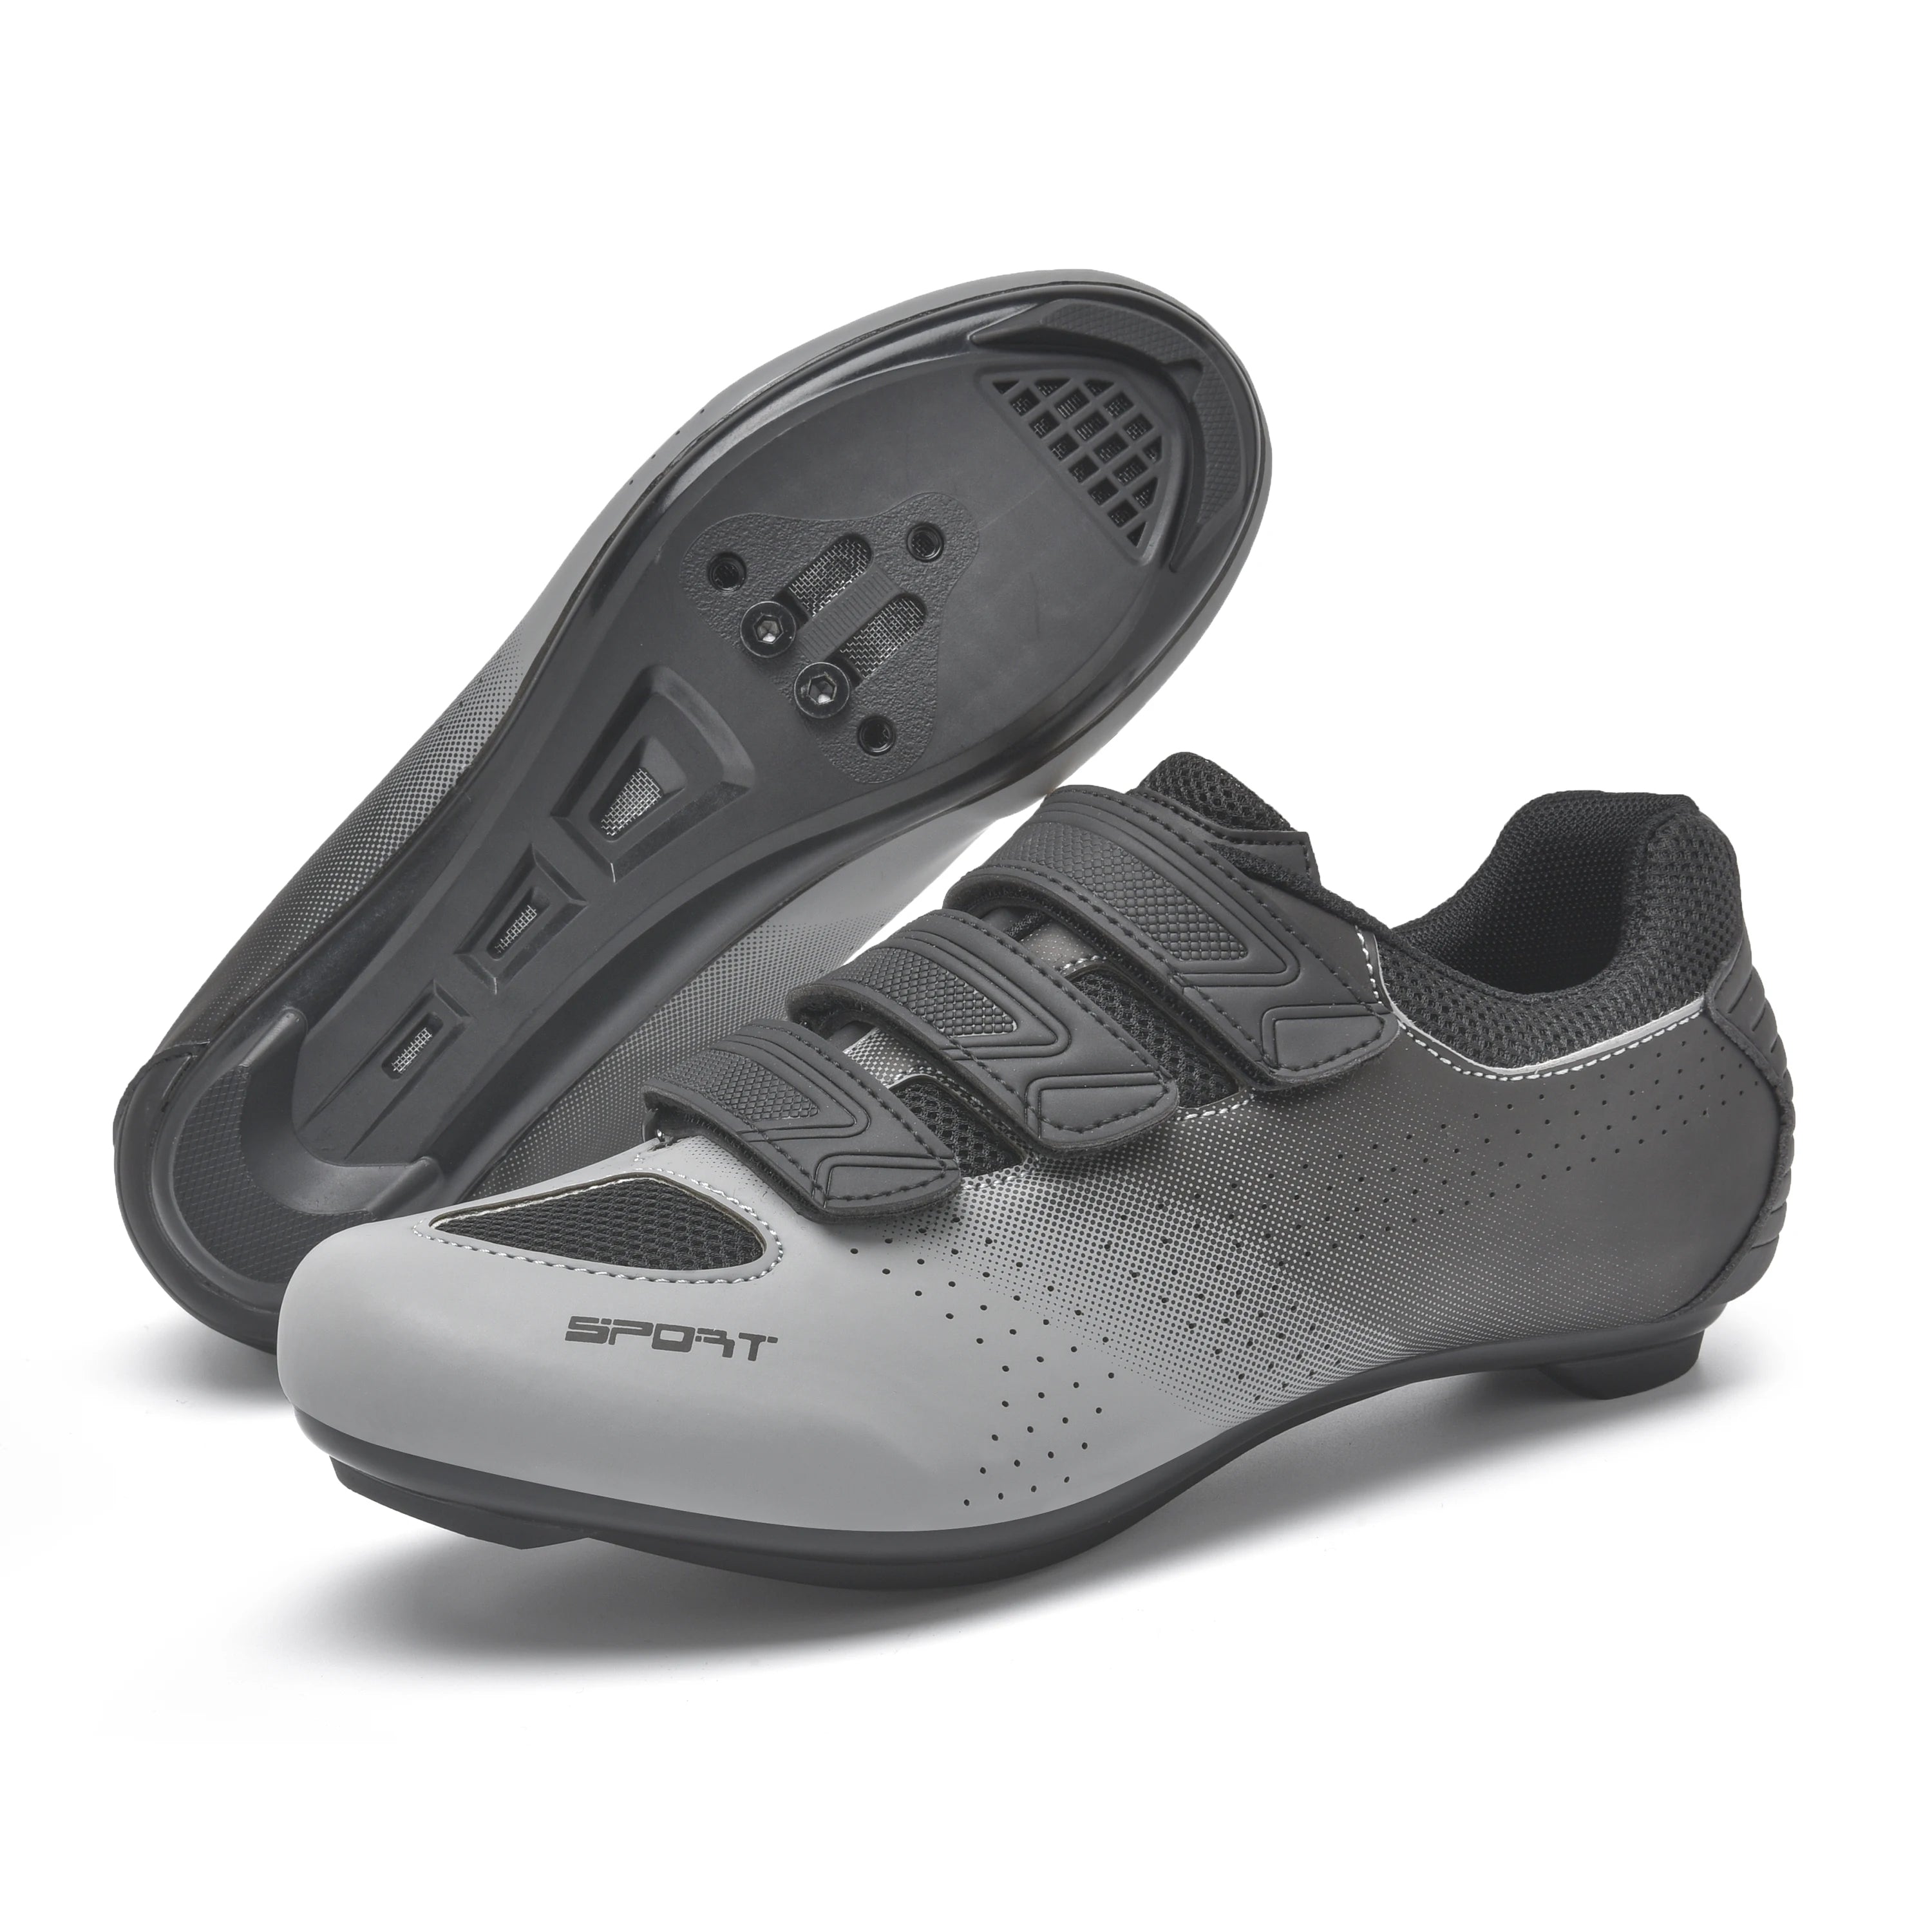 Women Cycling Shoes for Road or Mountain bike- With Cleats,  Cleatless, or flat rubber pair